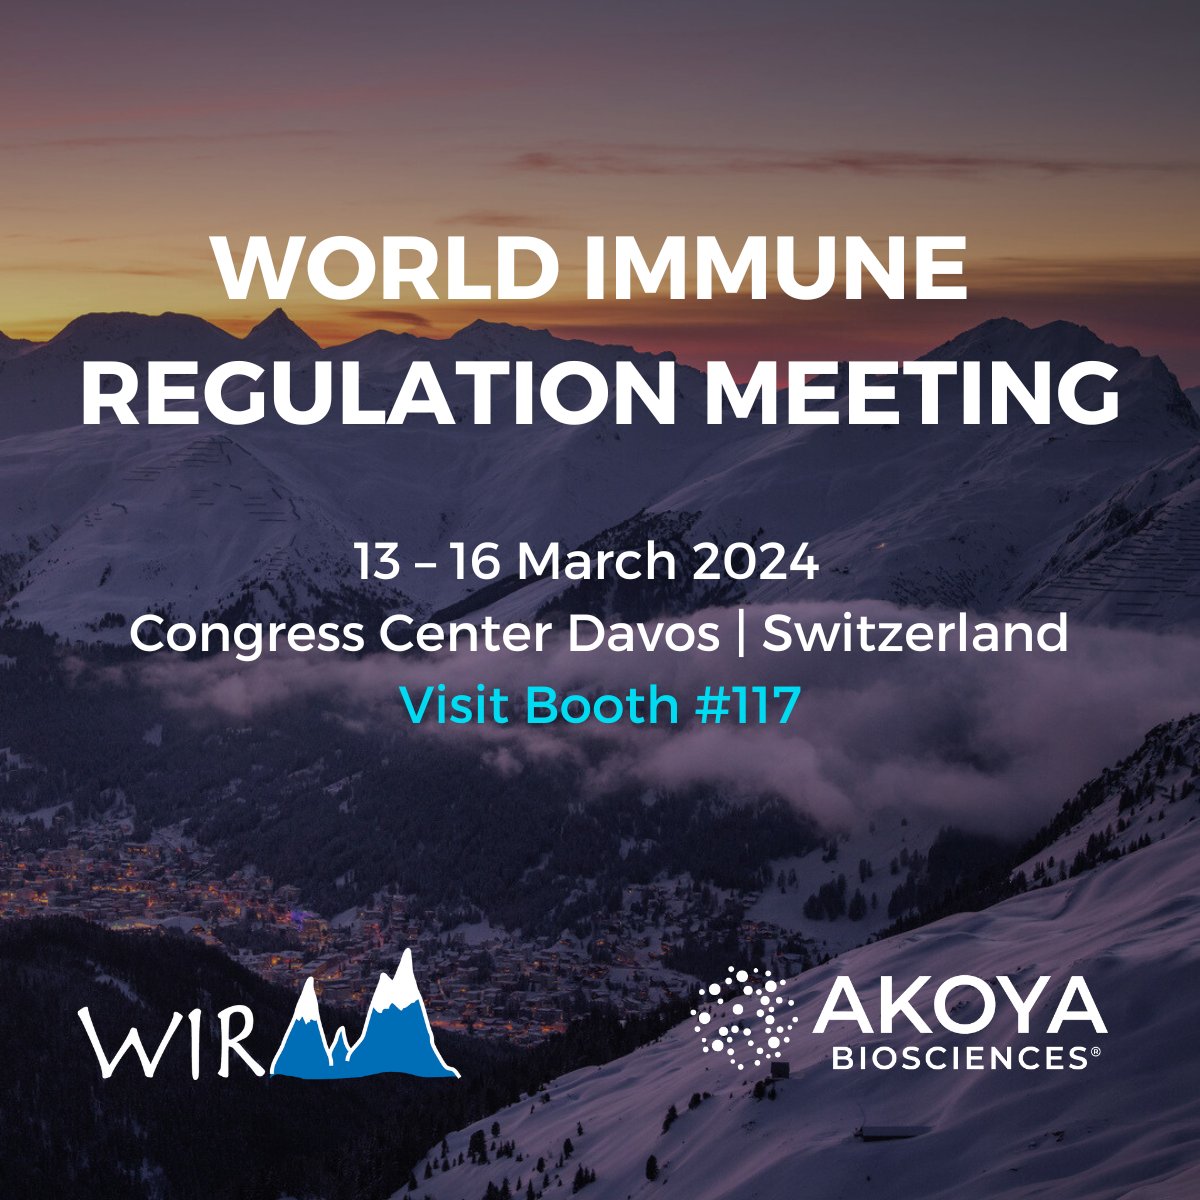 We look forward to exhibiting at #WIRM2024 from March 13-16, 2024, at the Congress Center in Davos, Switzerland! Our team will be available at booth #117 to showcase our groundbreaking #spatialbiology solutions. bit.ly/49wfjaI @SIAF_UZH #Immunology